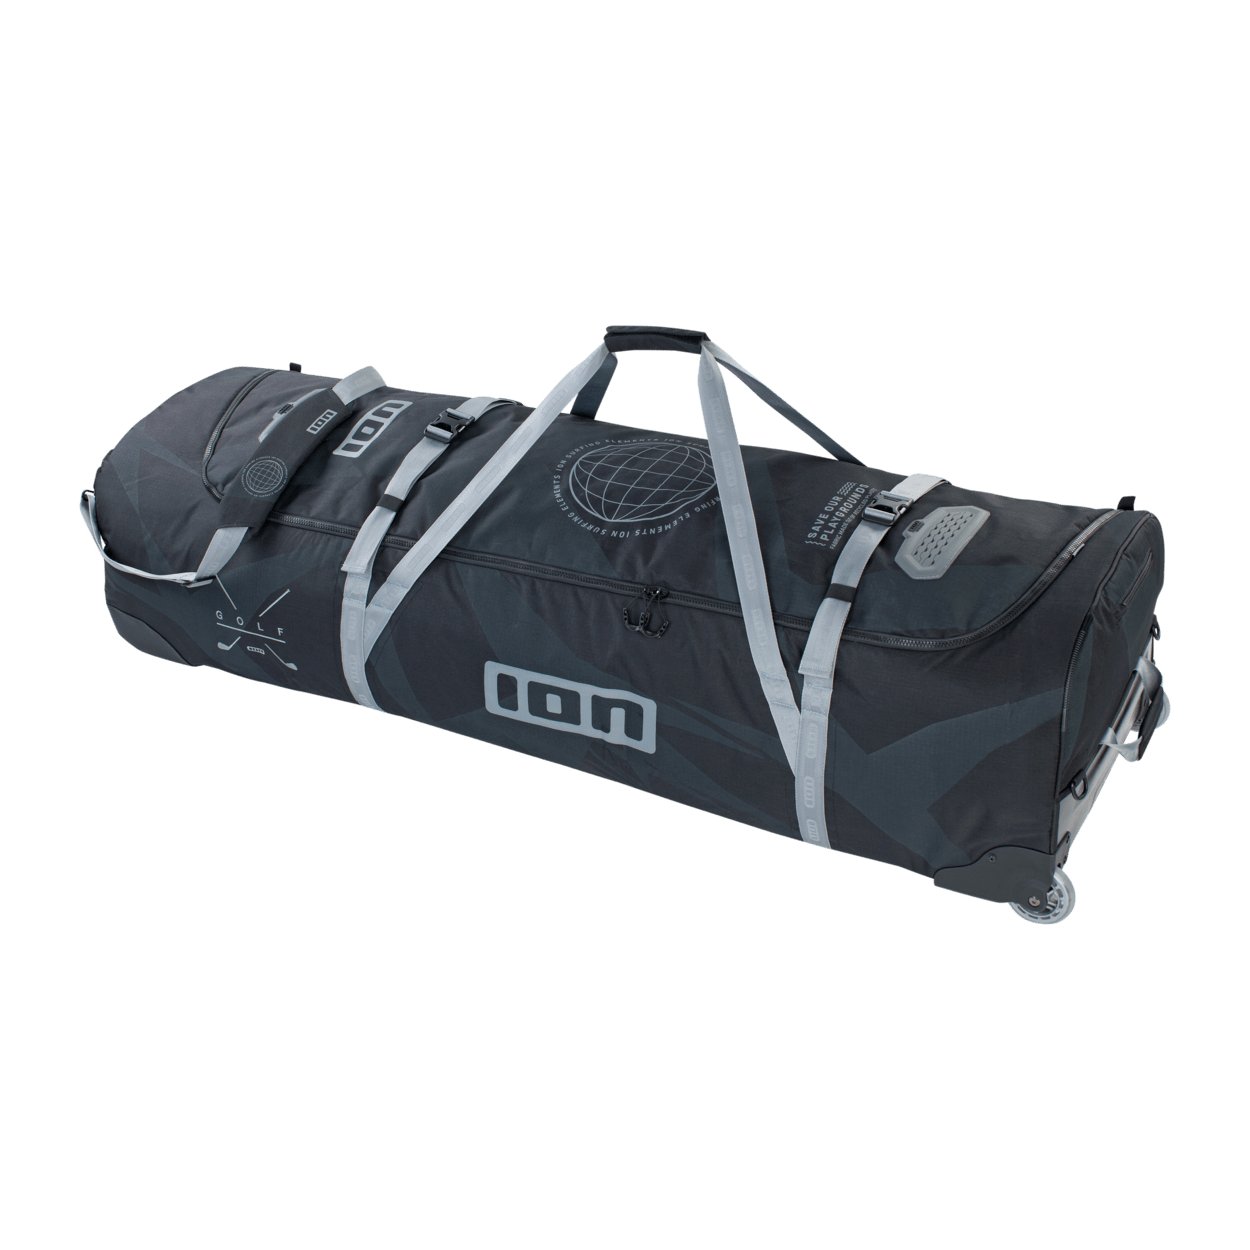 ION Gearbag Tec Golf 2022 - Worthing Watersports - 9010583059723 - Bags - ION Water